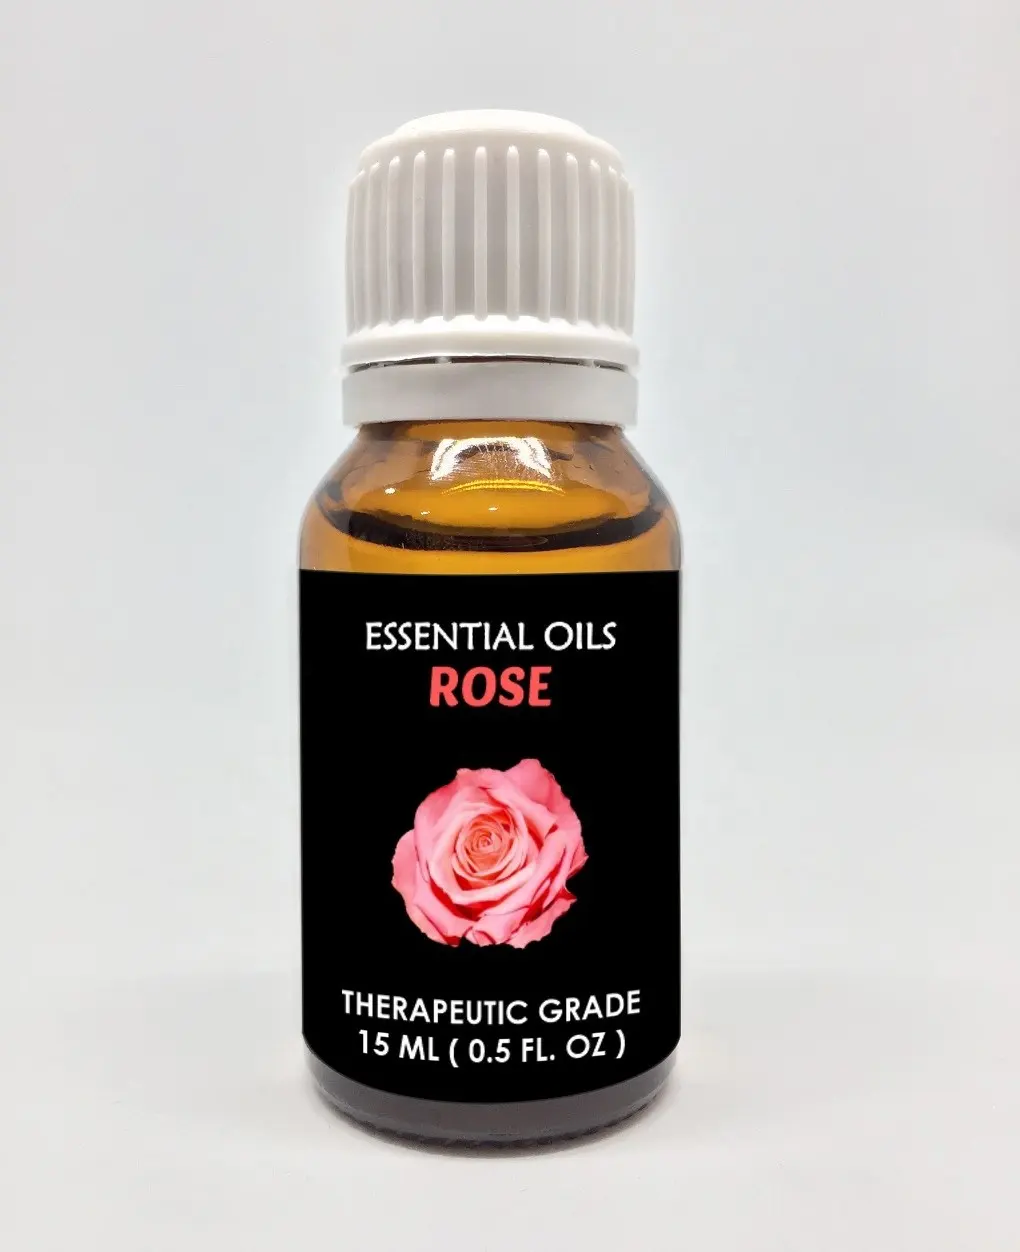 Pure Rose Essential Oil at Low Price on Bulk Purchase